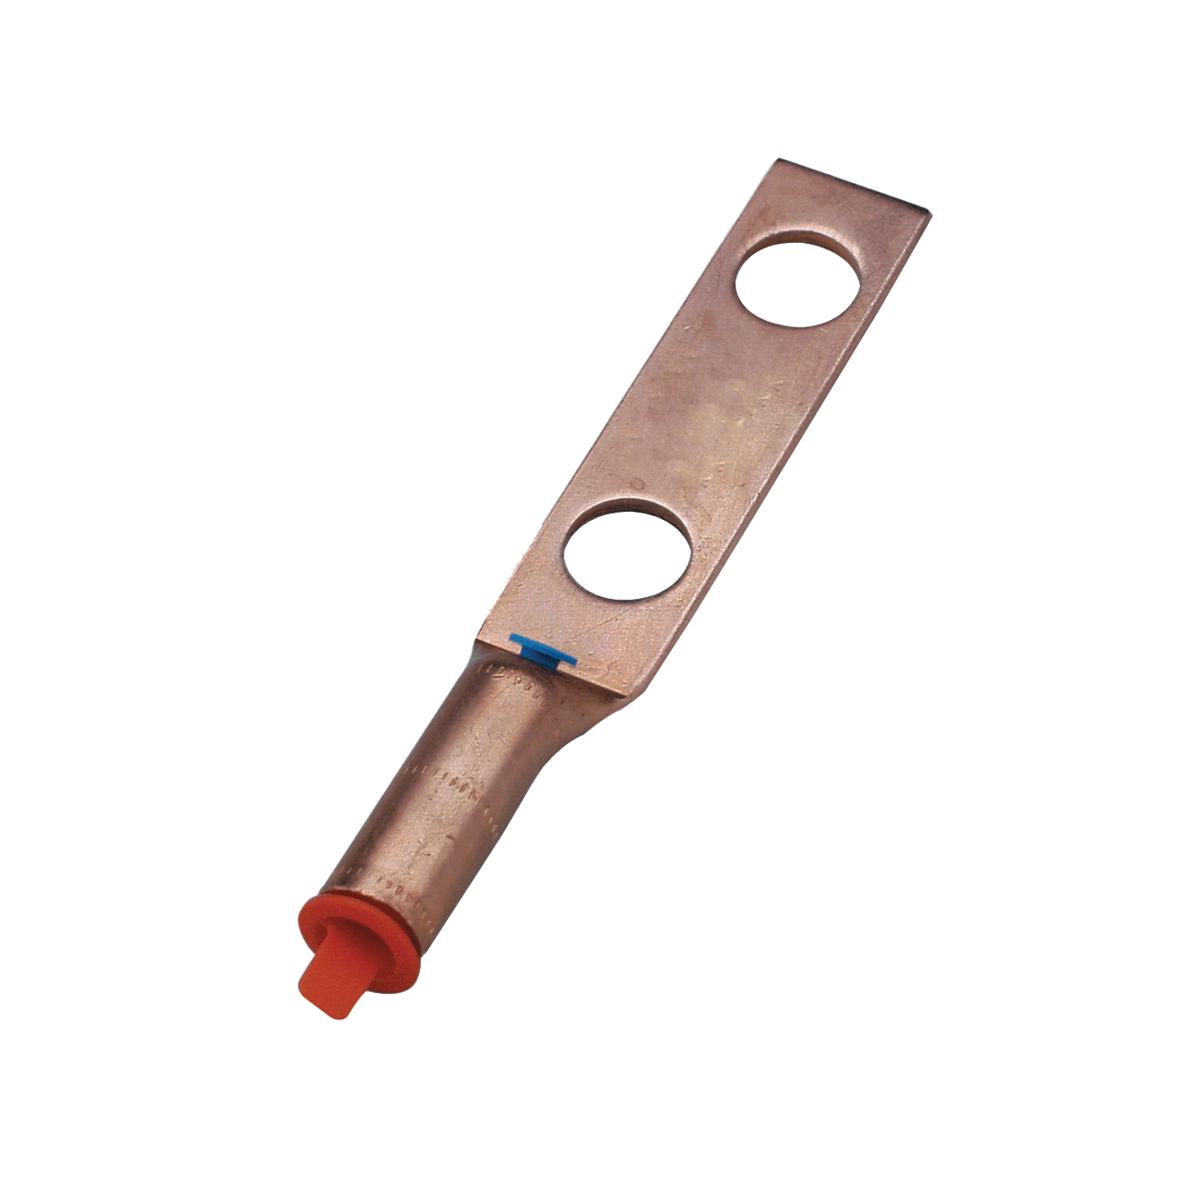 Hubbell YGA8C2N HYLUG™ Copper Compression Terminal for Grounding; 2-Hole; 1/2" Stud; 1-3/4" Spacing; Long Barrel; Accommodates: #8 AWG. 